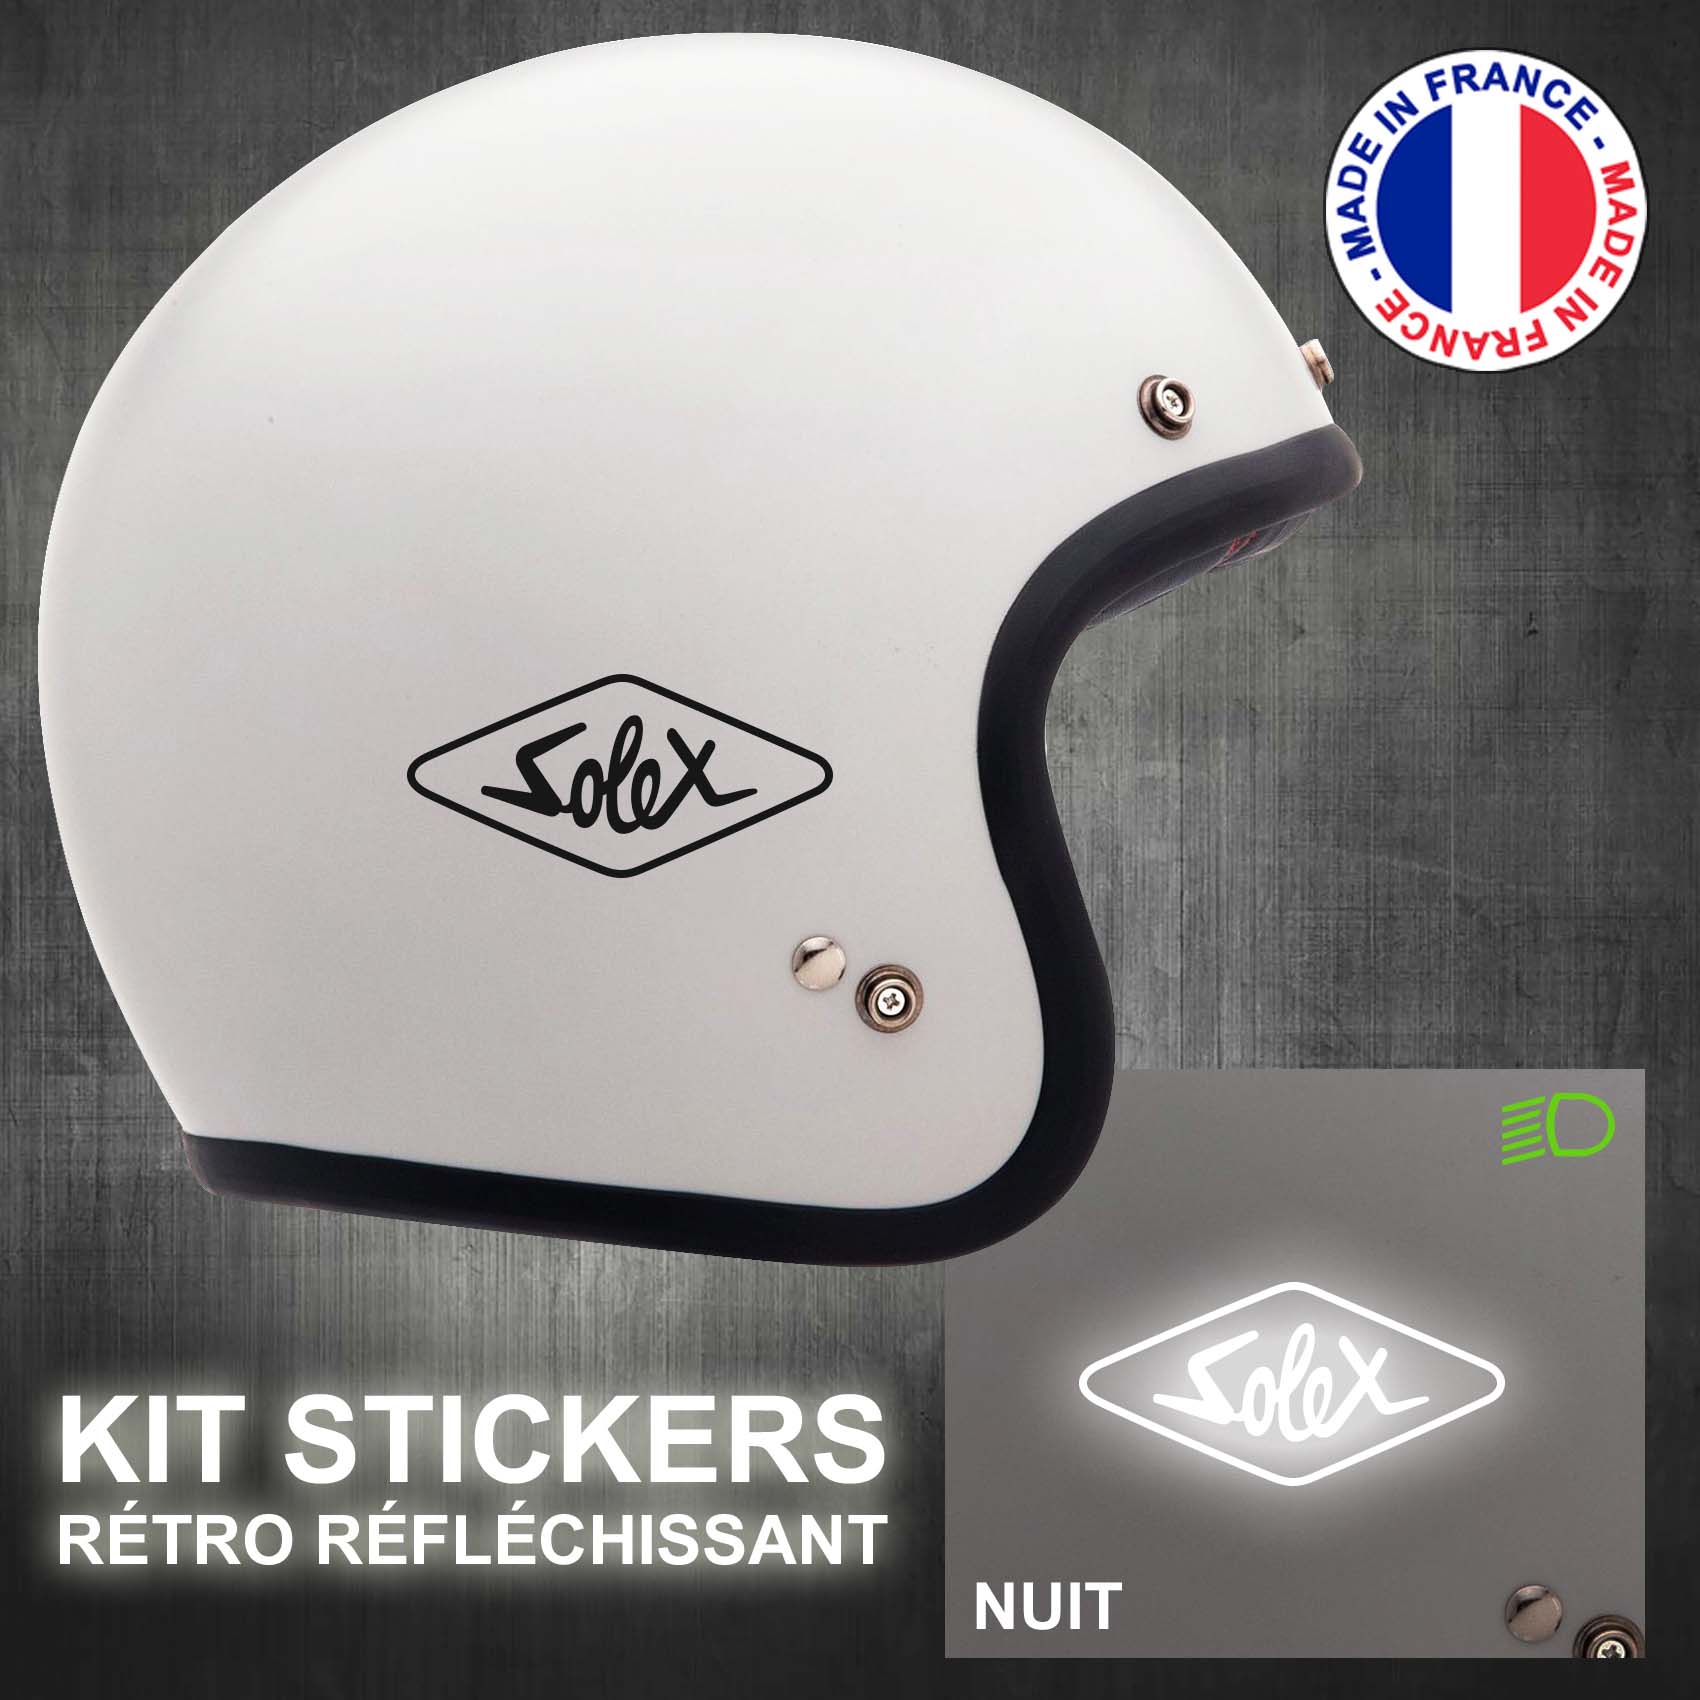 stickers-casque-moto-solex-ref2-retro-reflechissant-autocollant-blanc-moto-velo-tuning-racing-route-sticker-casques-adhesif-scooter-nuit-securite-decals-personnalise-personnalisable-min